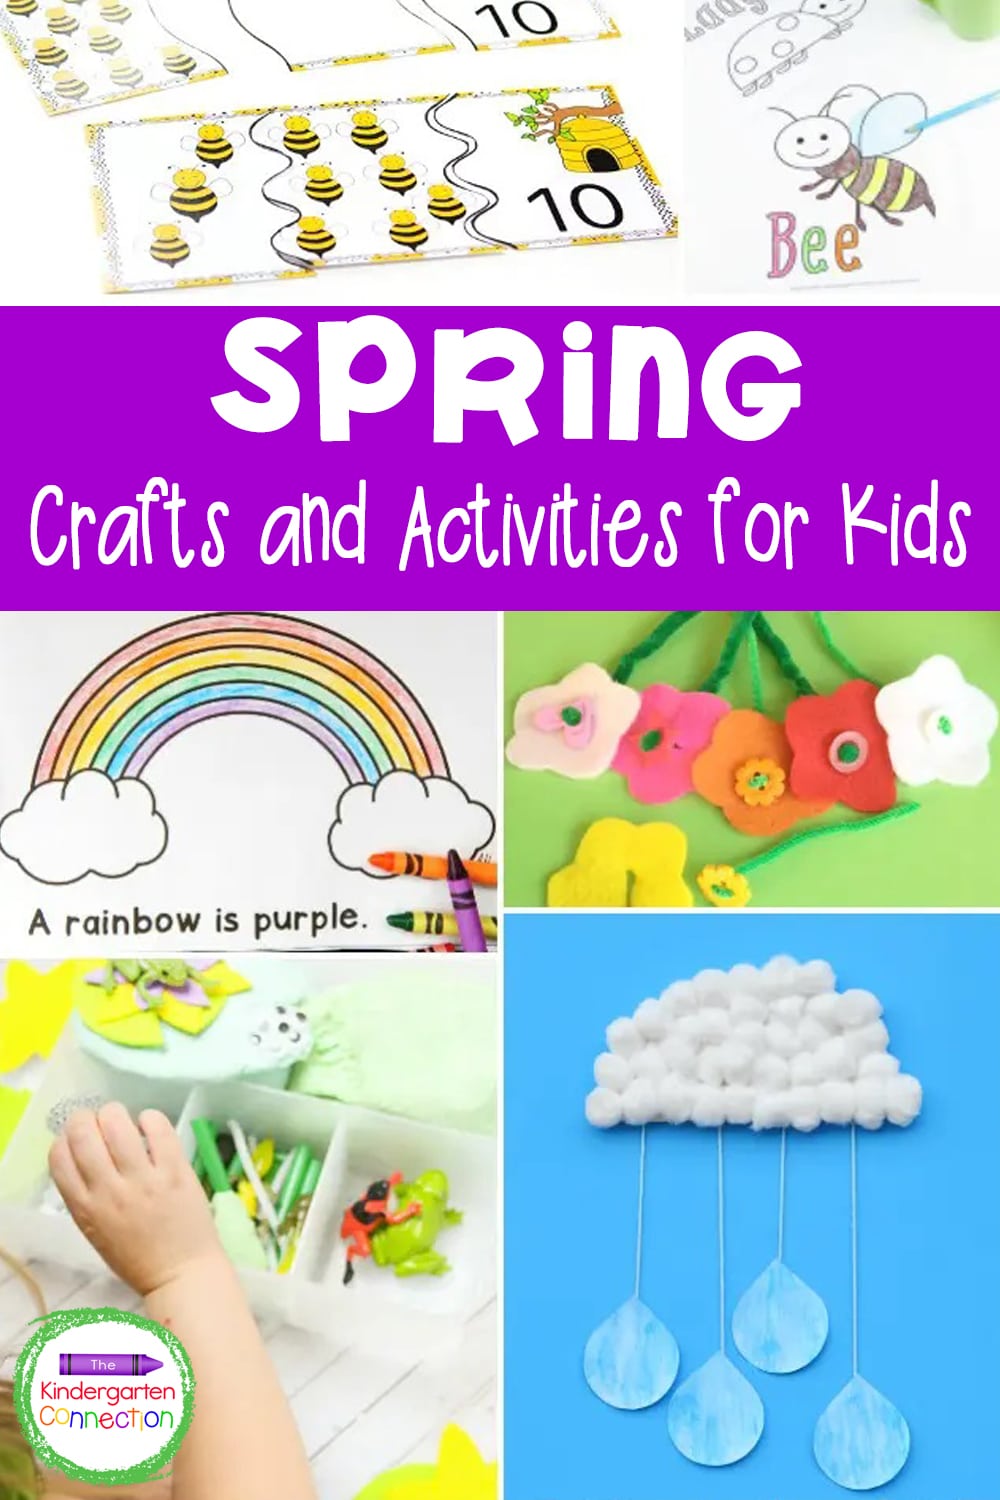 50+ Spring Crafts and Activities for Kids